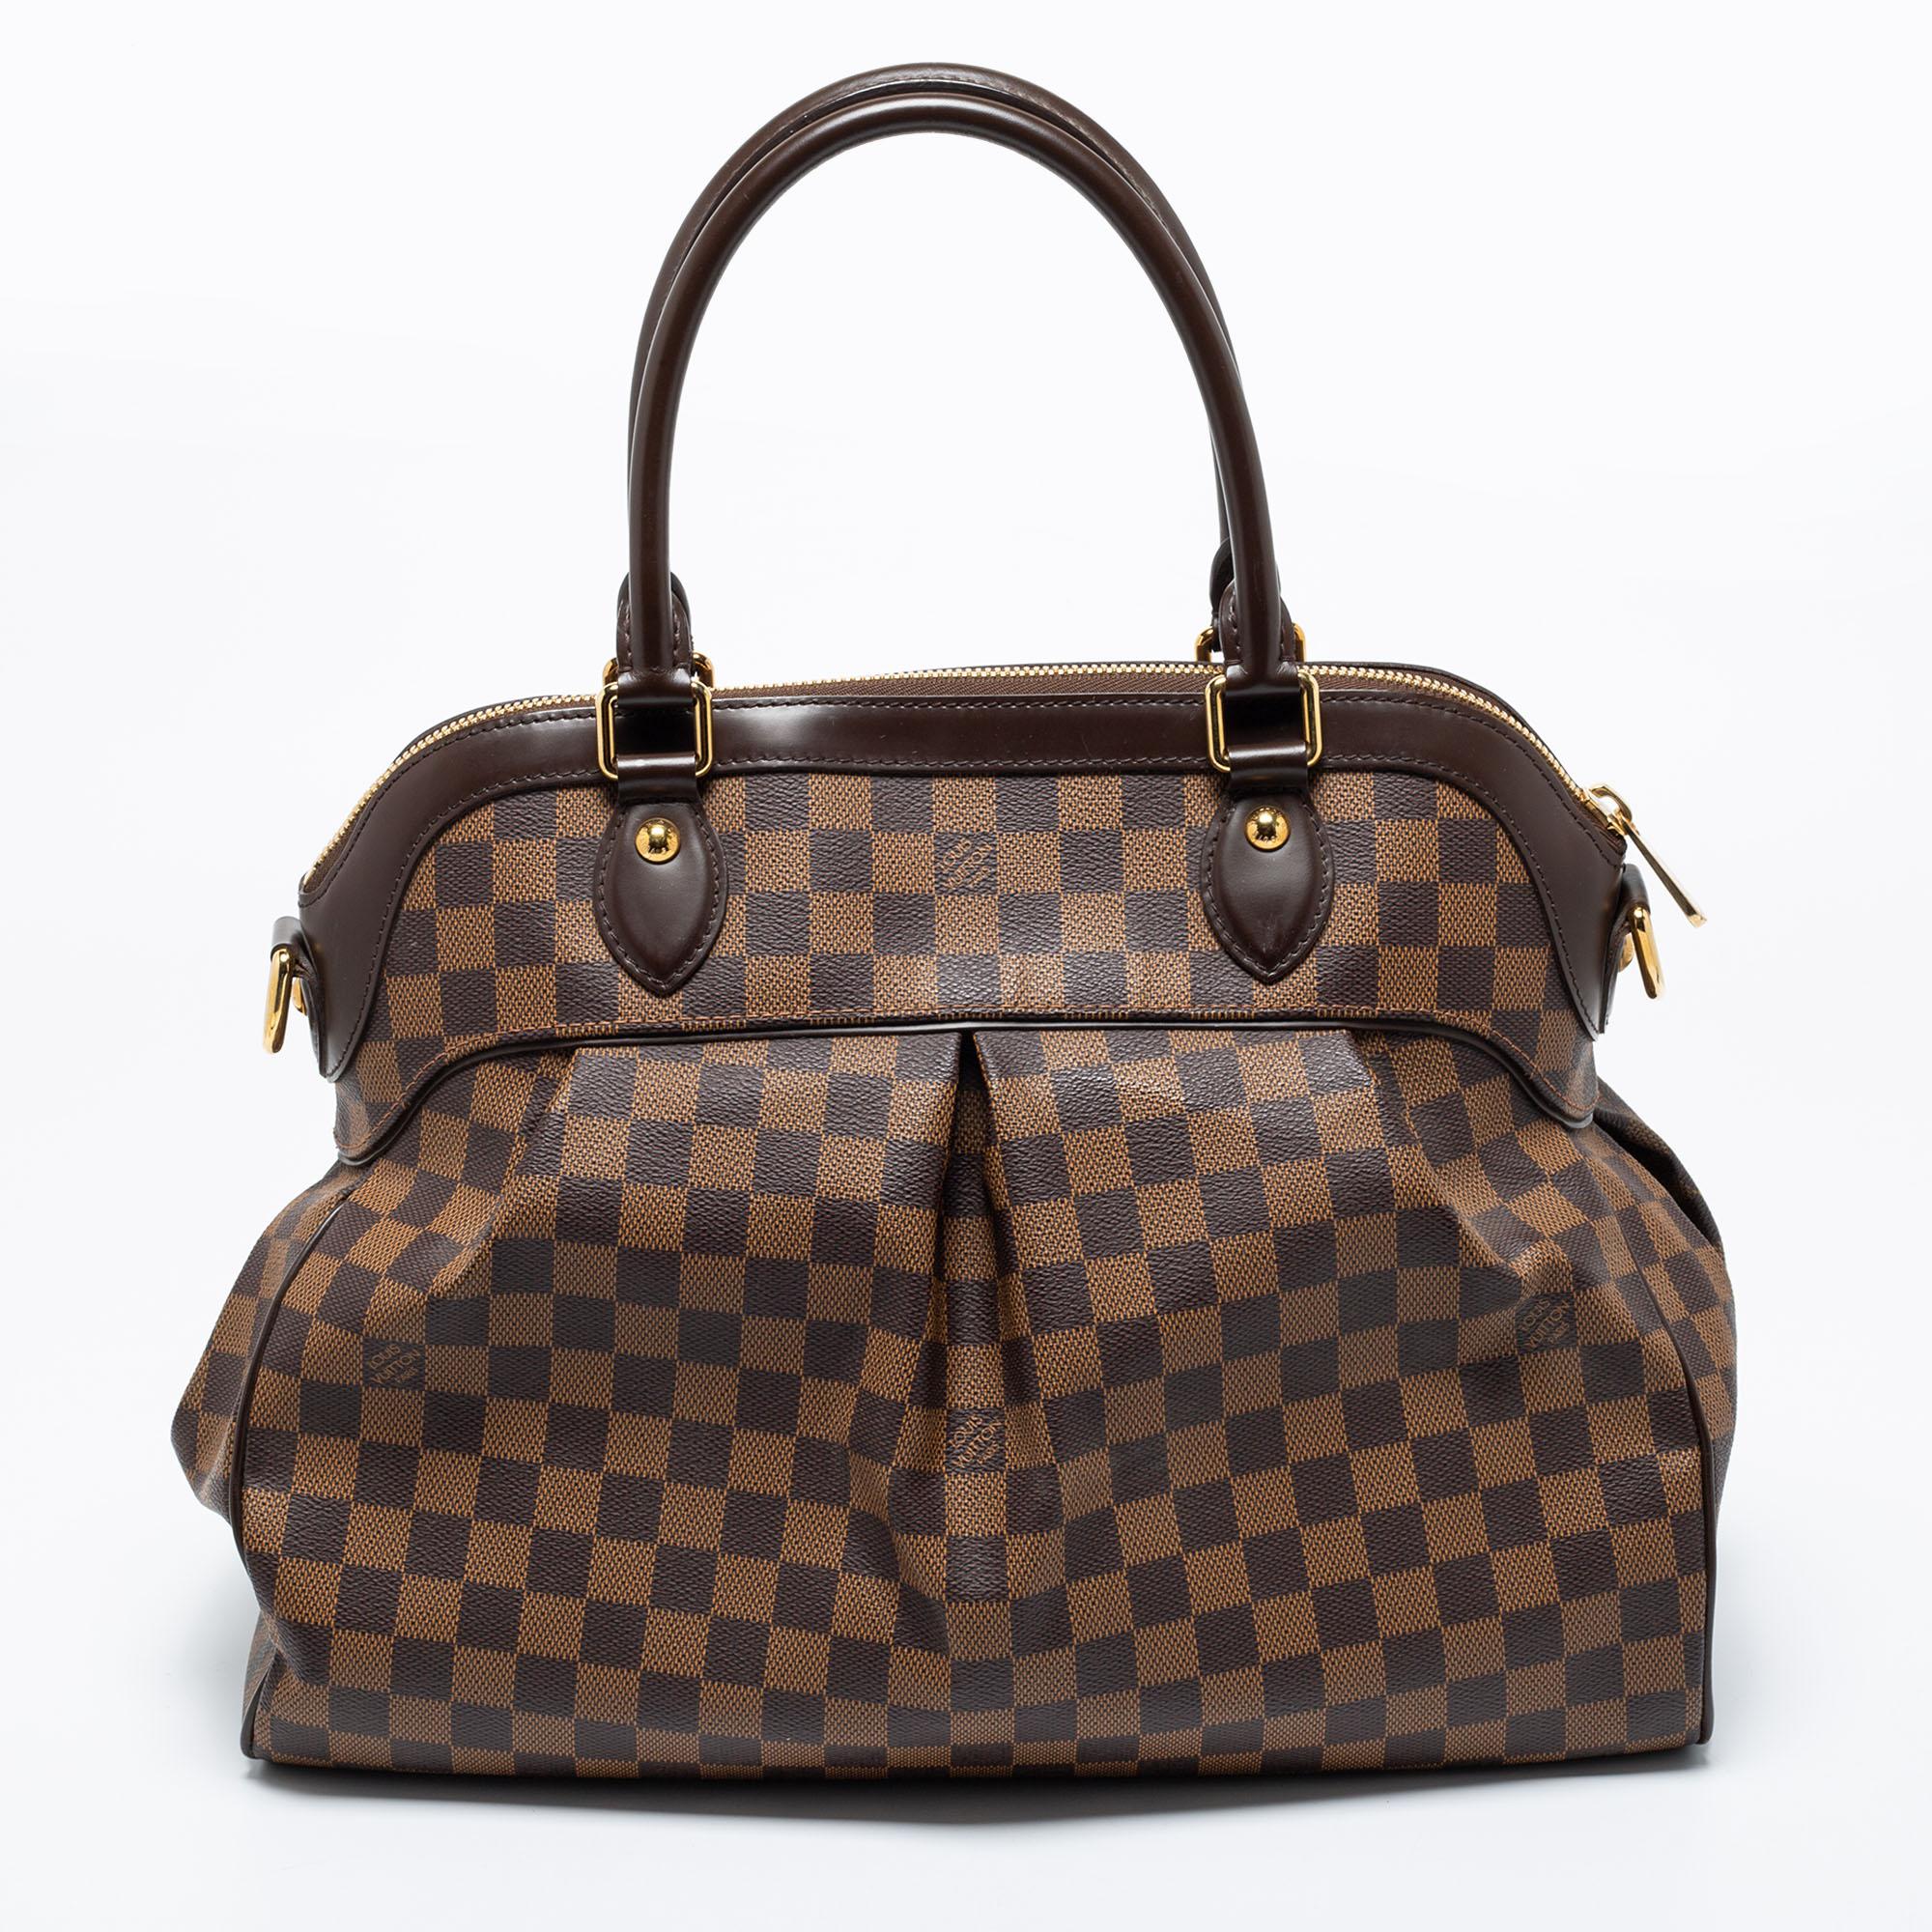 This Trevi bag by Louis Vuitton has been crafted from Damier Ebene canvas and it features two leather handles. It has gold-tone hardware, protective metal feet, and a top zip that opens up to a spacious Alcantara compartment. This finely-made piece